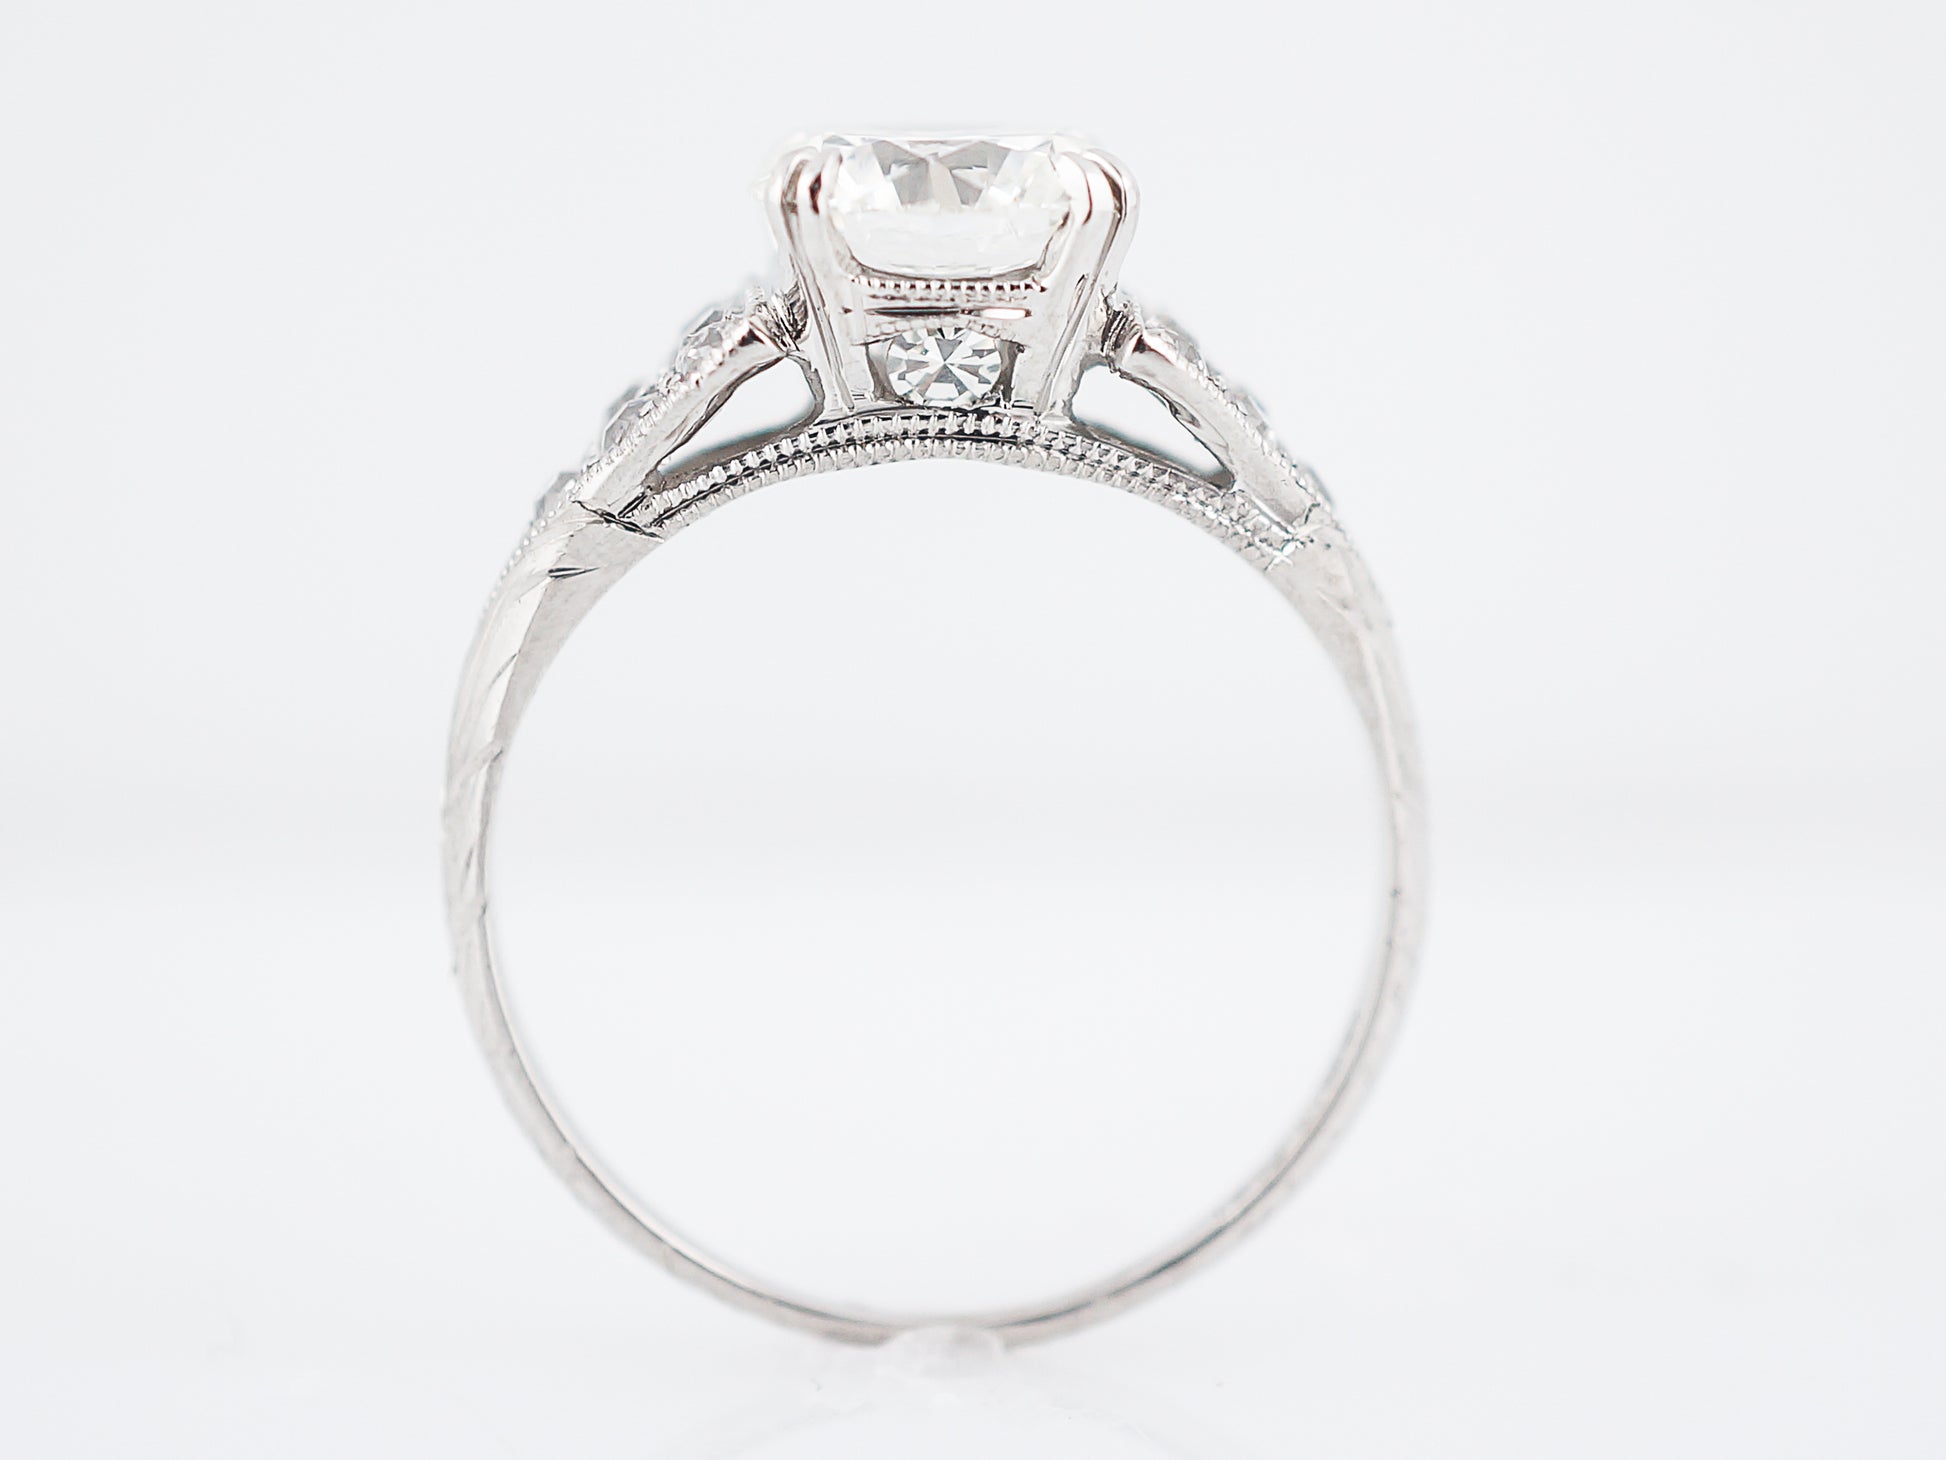 Antique Engagement Ring Art Deco 1.50 GIA Certified Round Brilliant Cut Diamond in PlatinumComposition: PlatinumRing Size: 6.5Total Diamond Weight: 1.74 cttw ctTotal Gram Weight: 3.87 rams gInscription: 10 % IRID PLAT